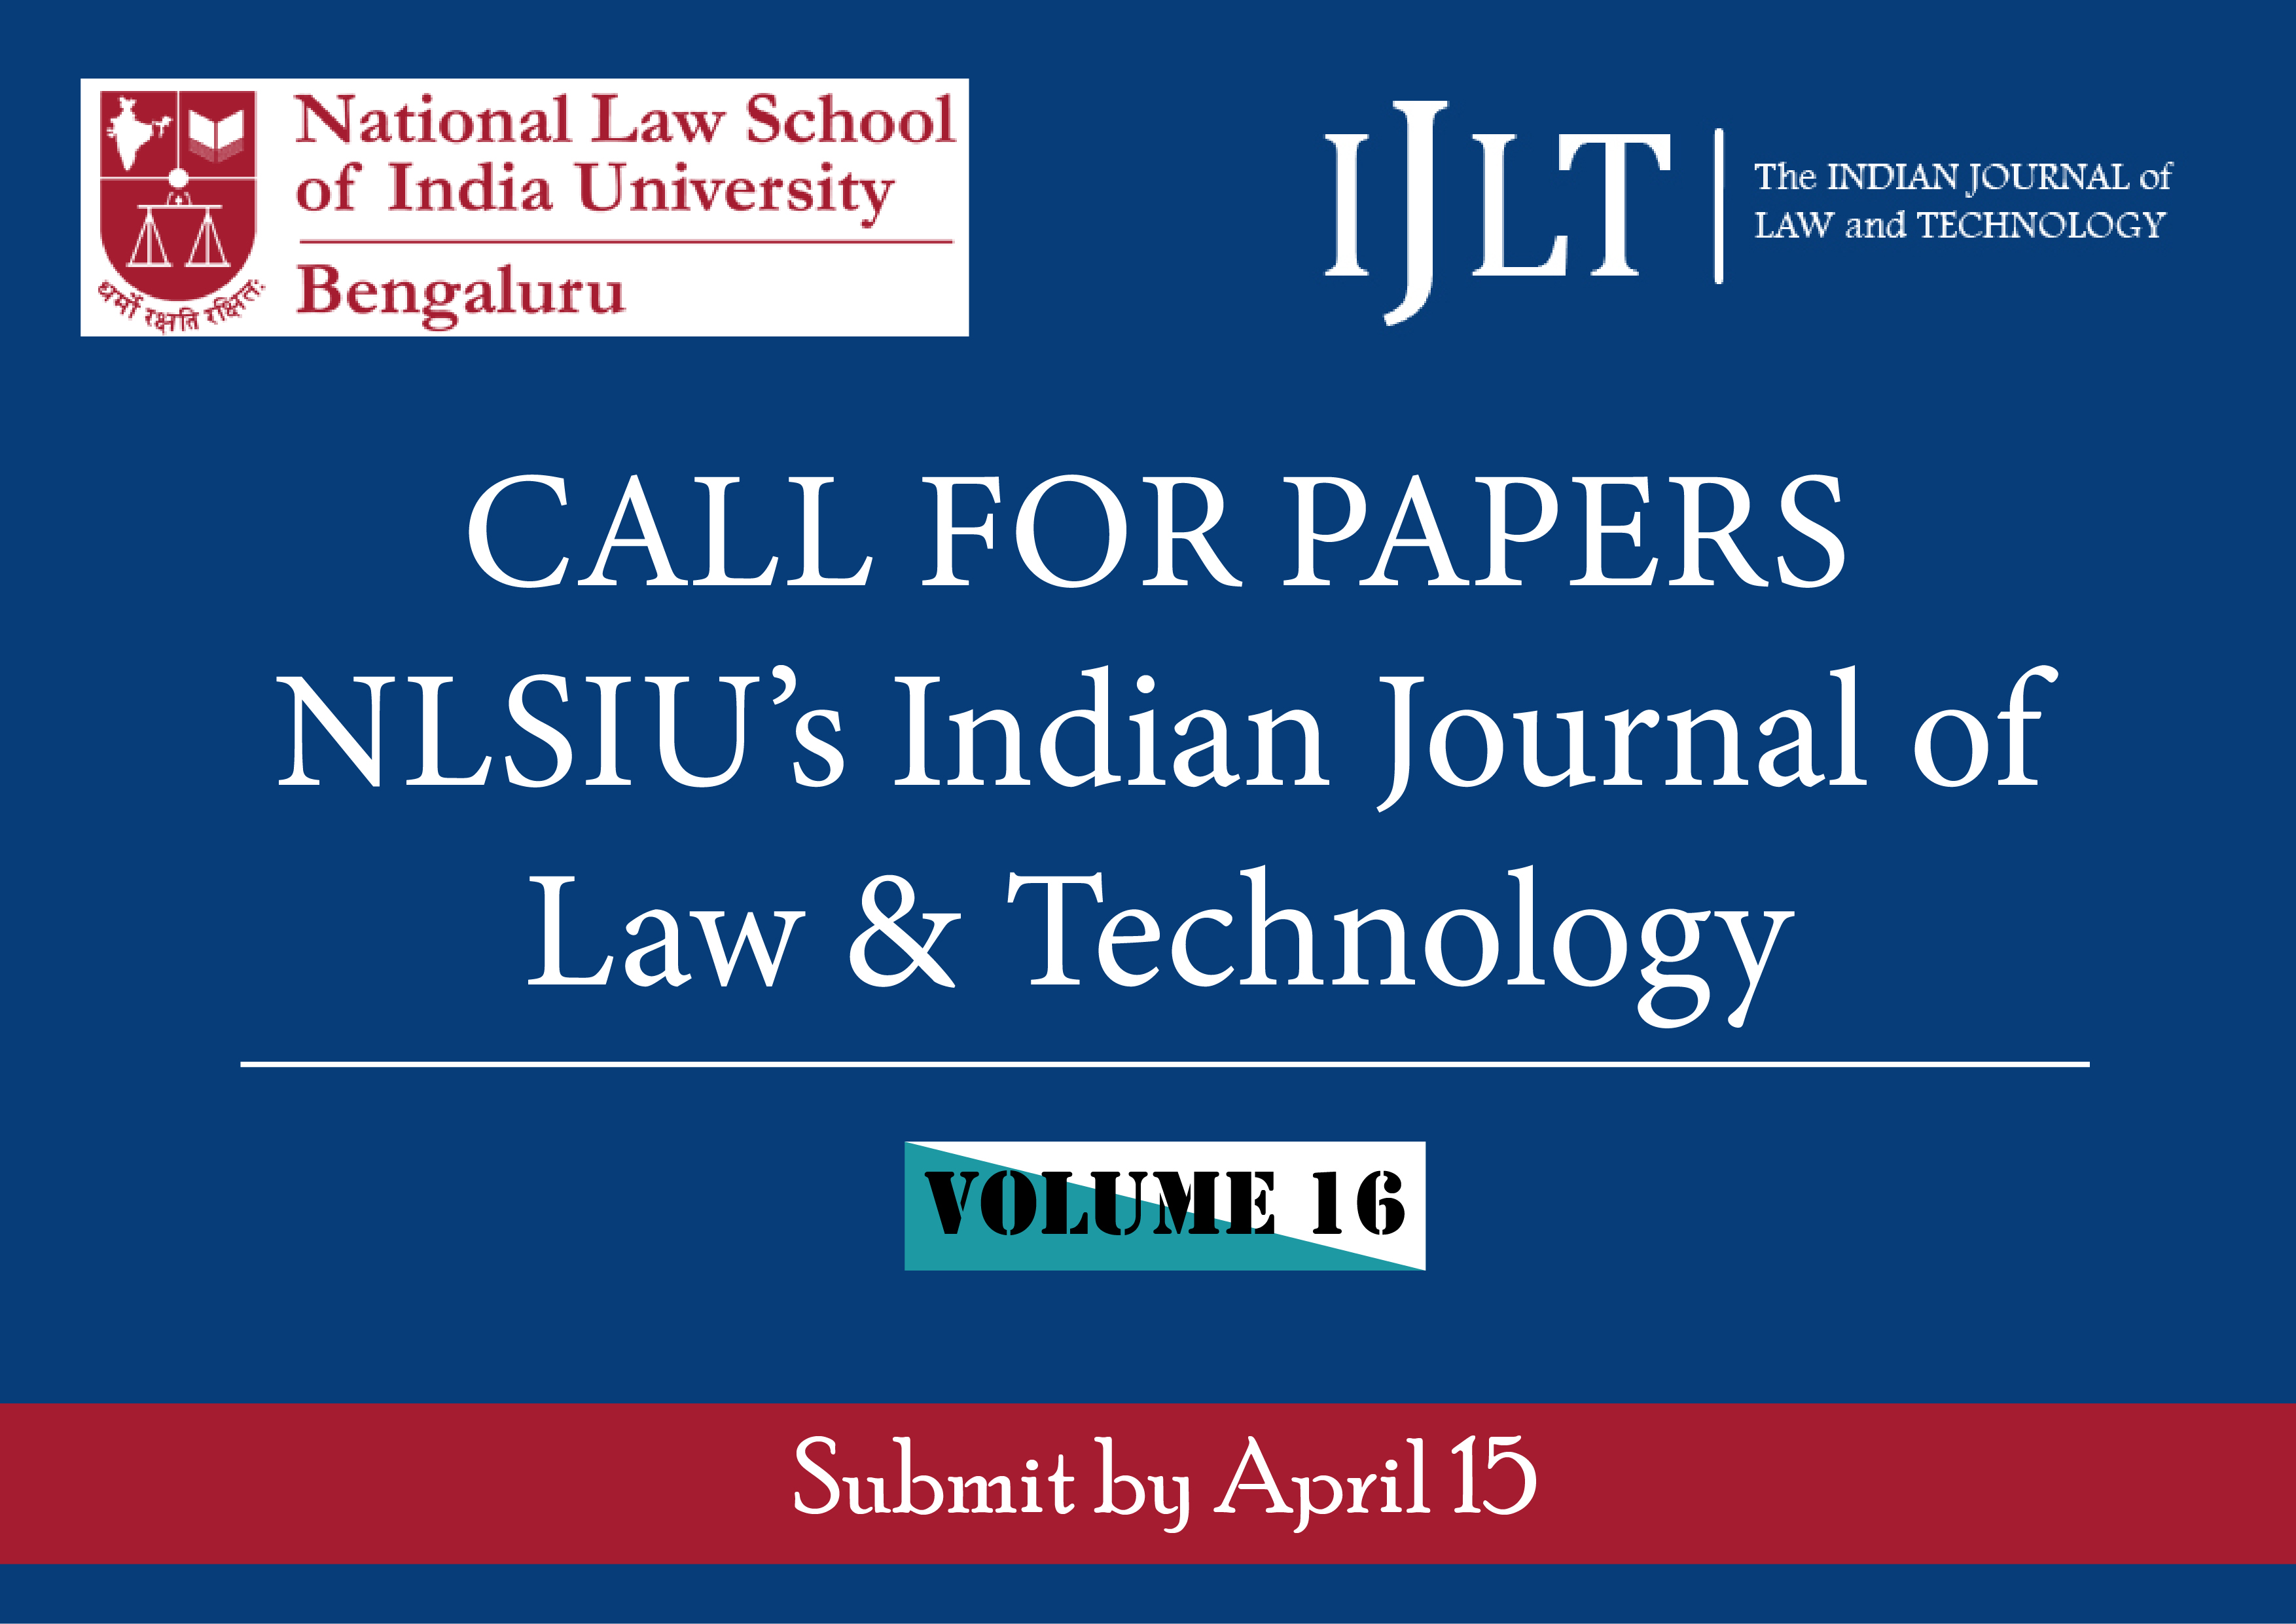 Call for Papers: NLSIU’s Indian Journal of Law & Technology Vol. 16